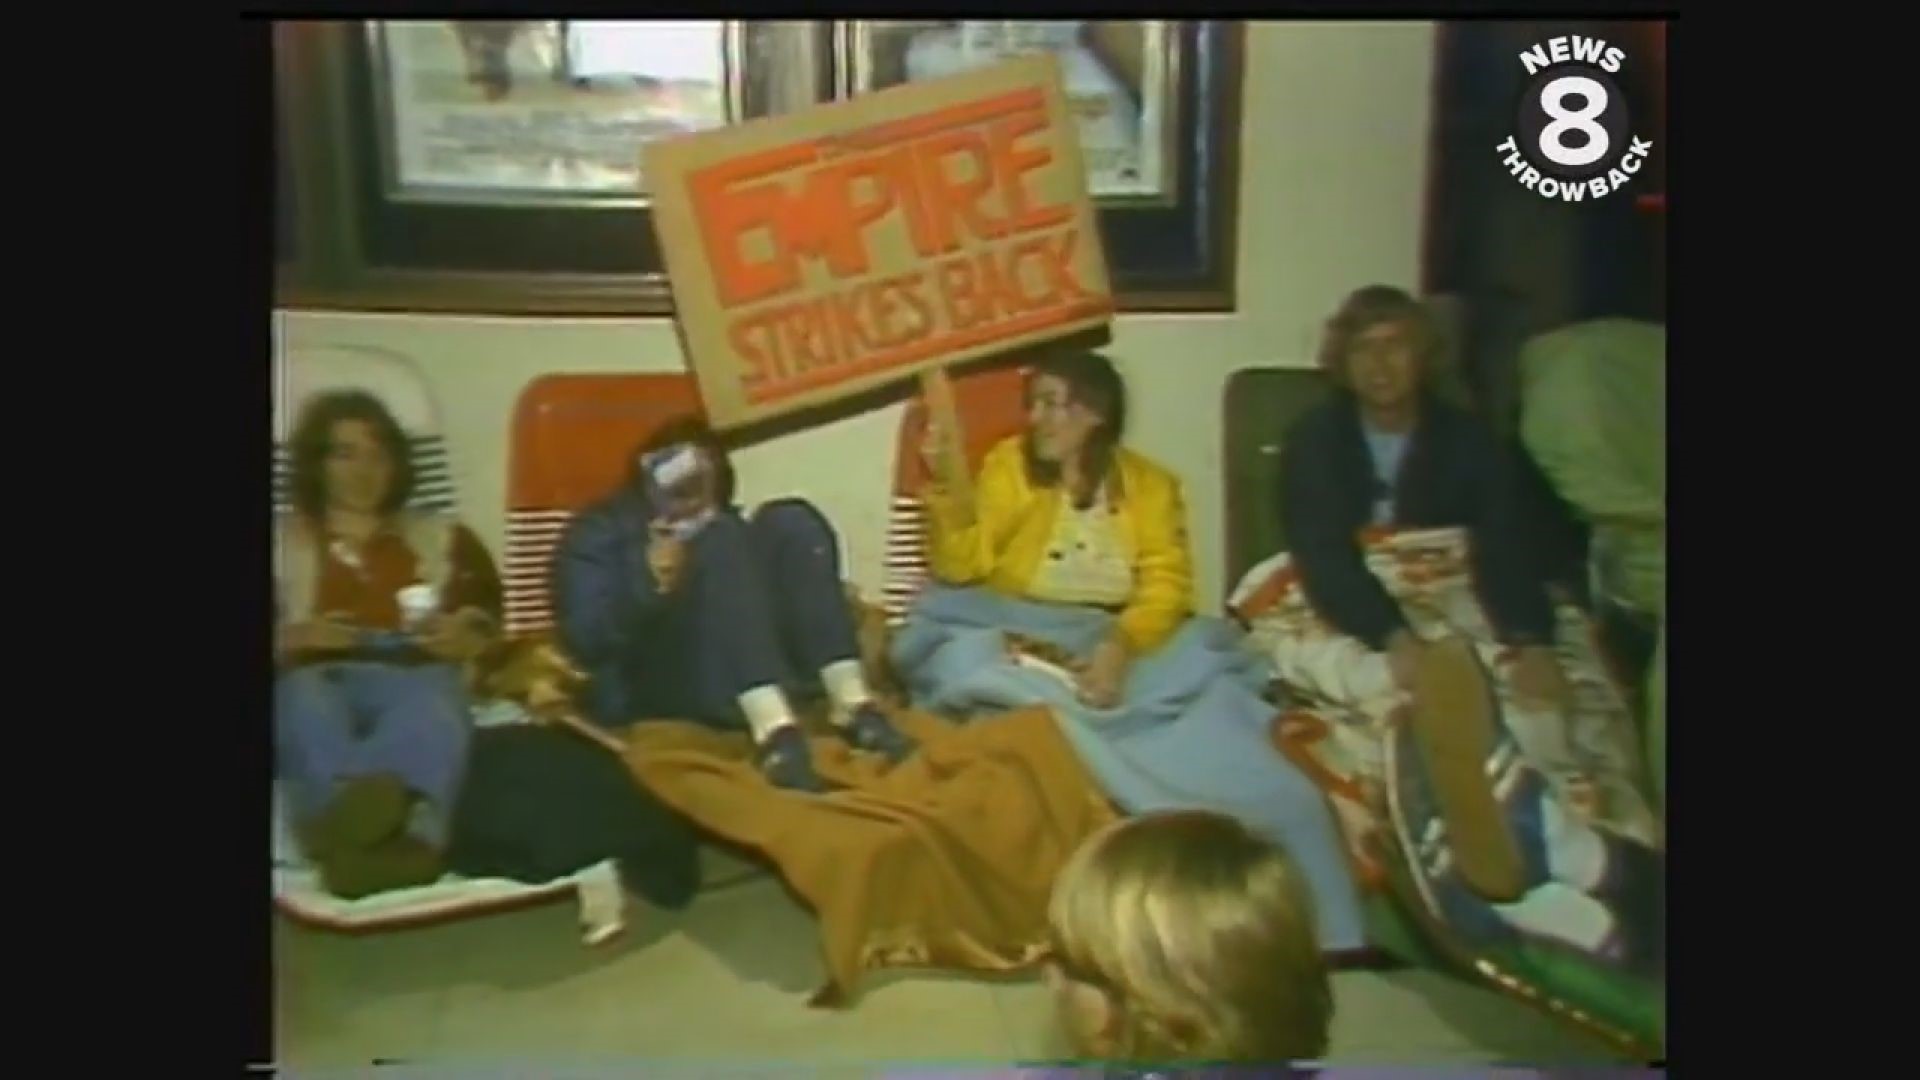 We got into the "Star Wars" spirit with a dive into the News 8 archives where we found clips of San Diegans lining up for premieres, toys from the films and more.